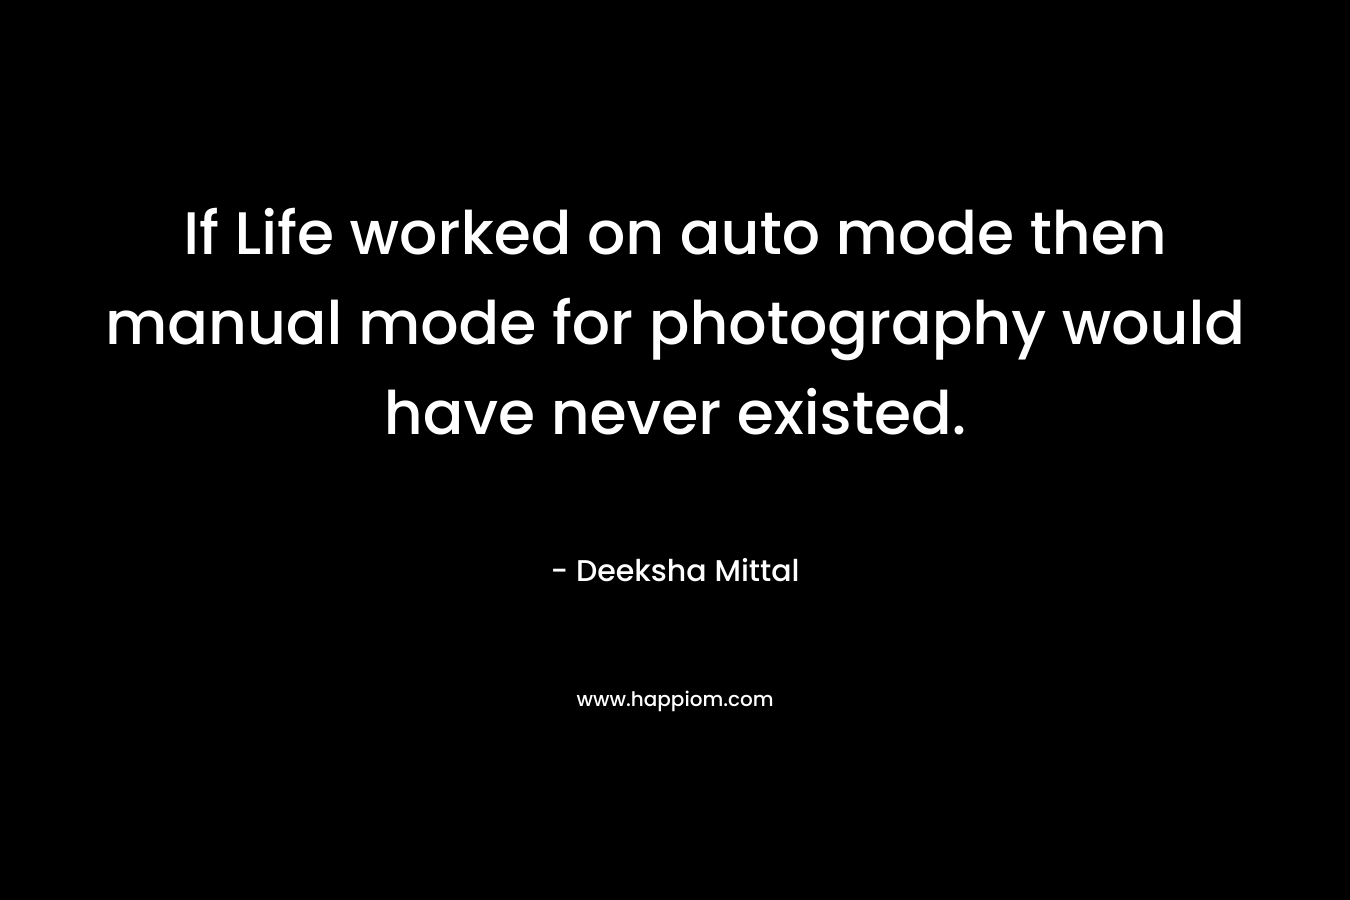 If Life worked on auto mode then manual mode for photography would have never existed. – Deeksha Mittal